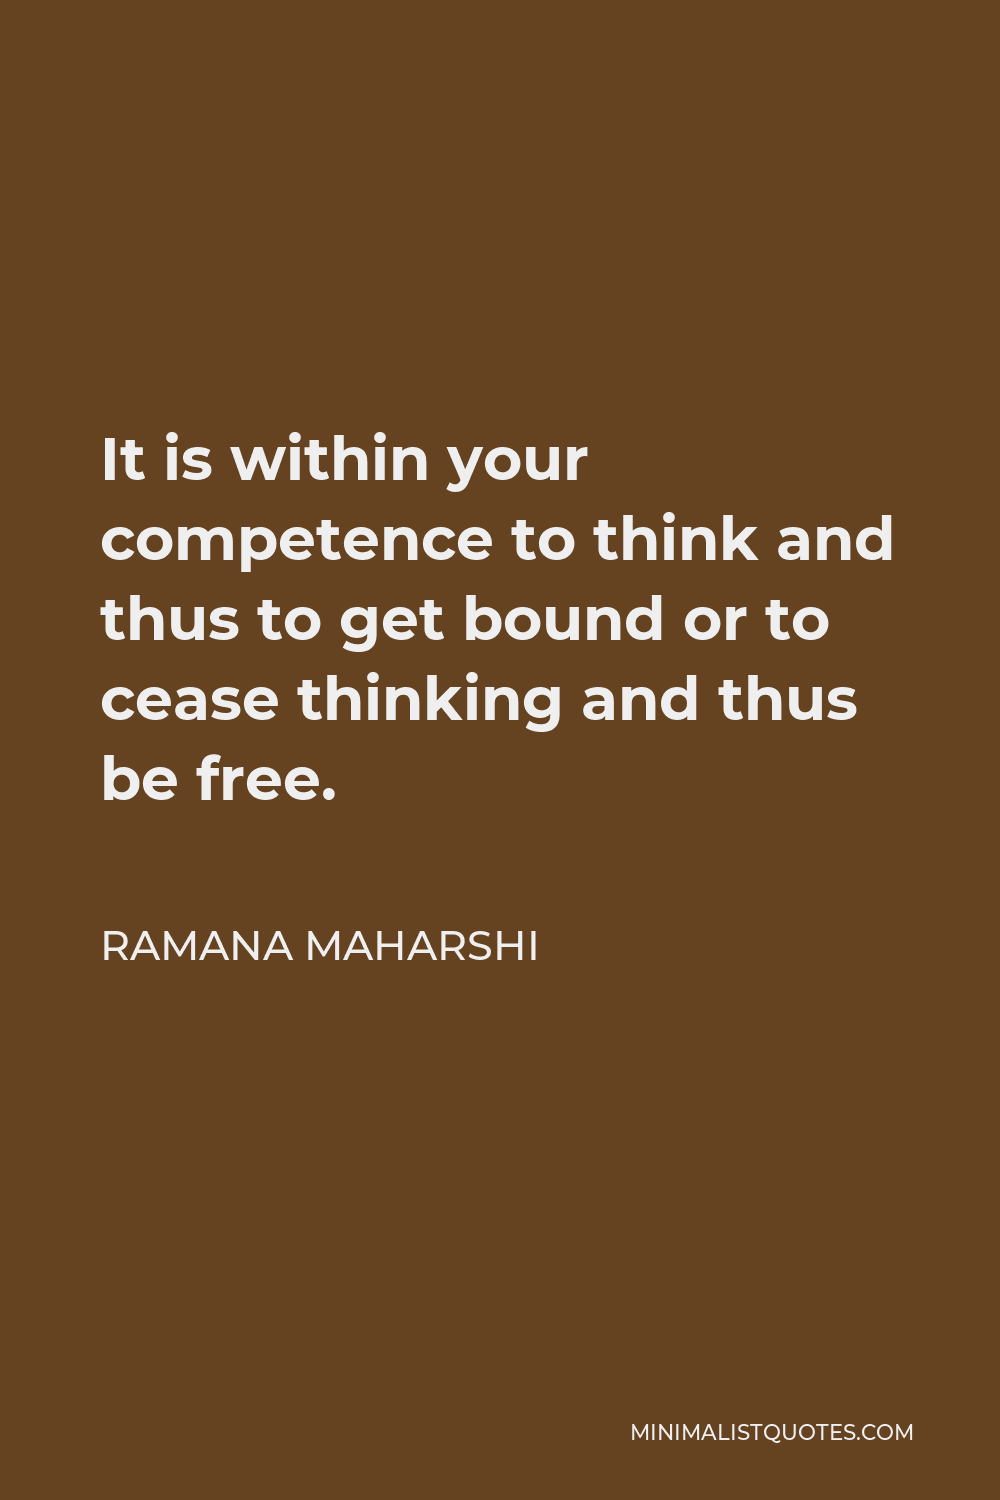 Ramana Maharshi Quote - It is within your competence to think and thus to get bound or to cease thinking and thus be free.